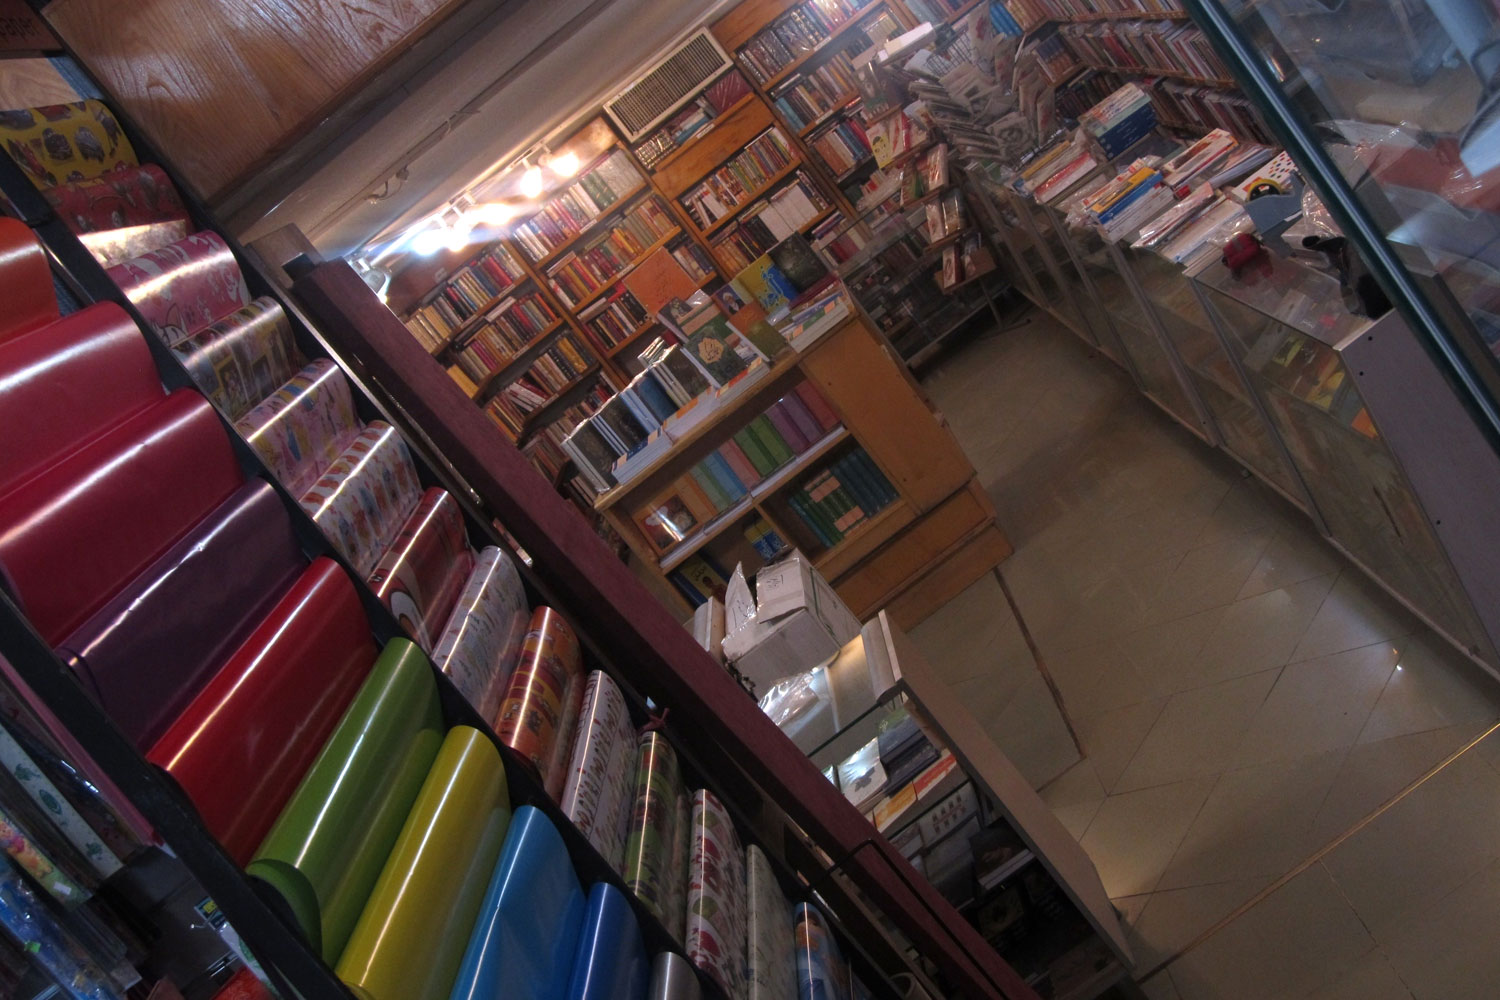 Astaneh BookCity